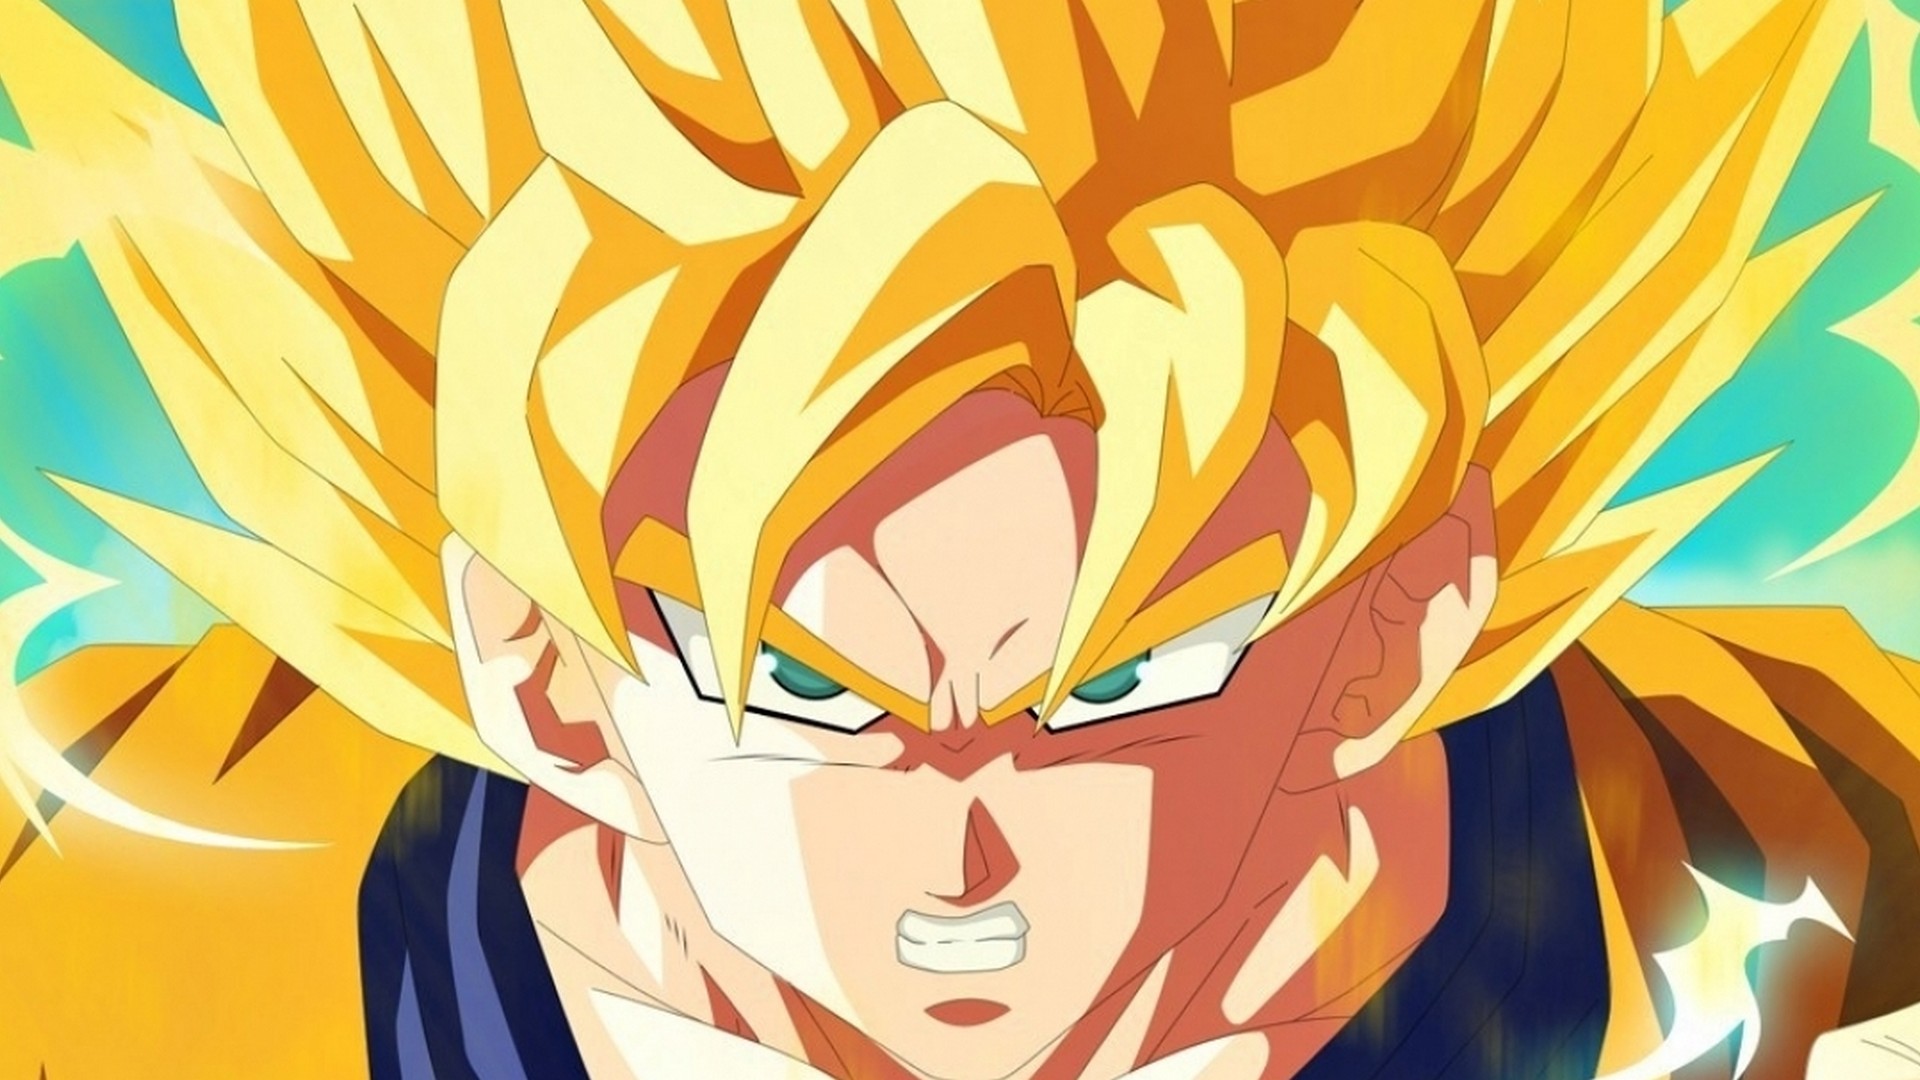 Goku Super Saiyan Desktop Backgrounds HD with resolution 1920X1080 pixel. You can use this wallpaper as background for your desktop Computer Screensavers, Android or iPhone smartphones